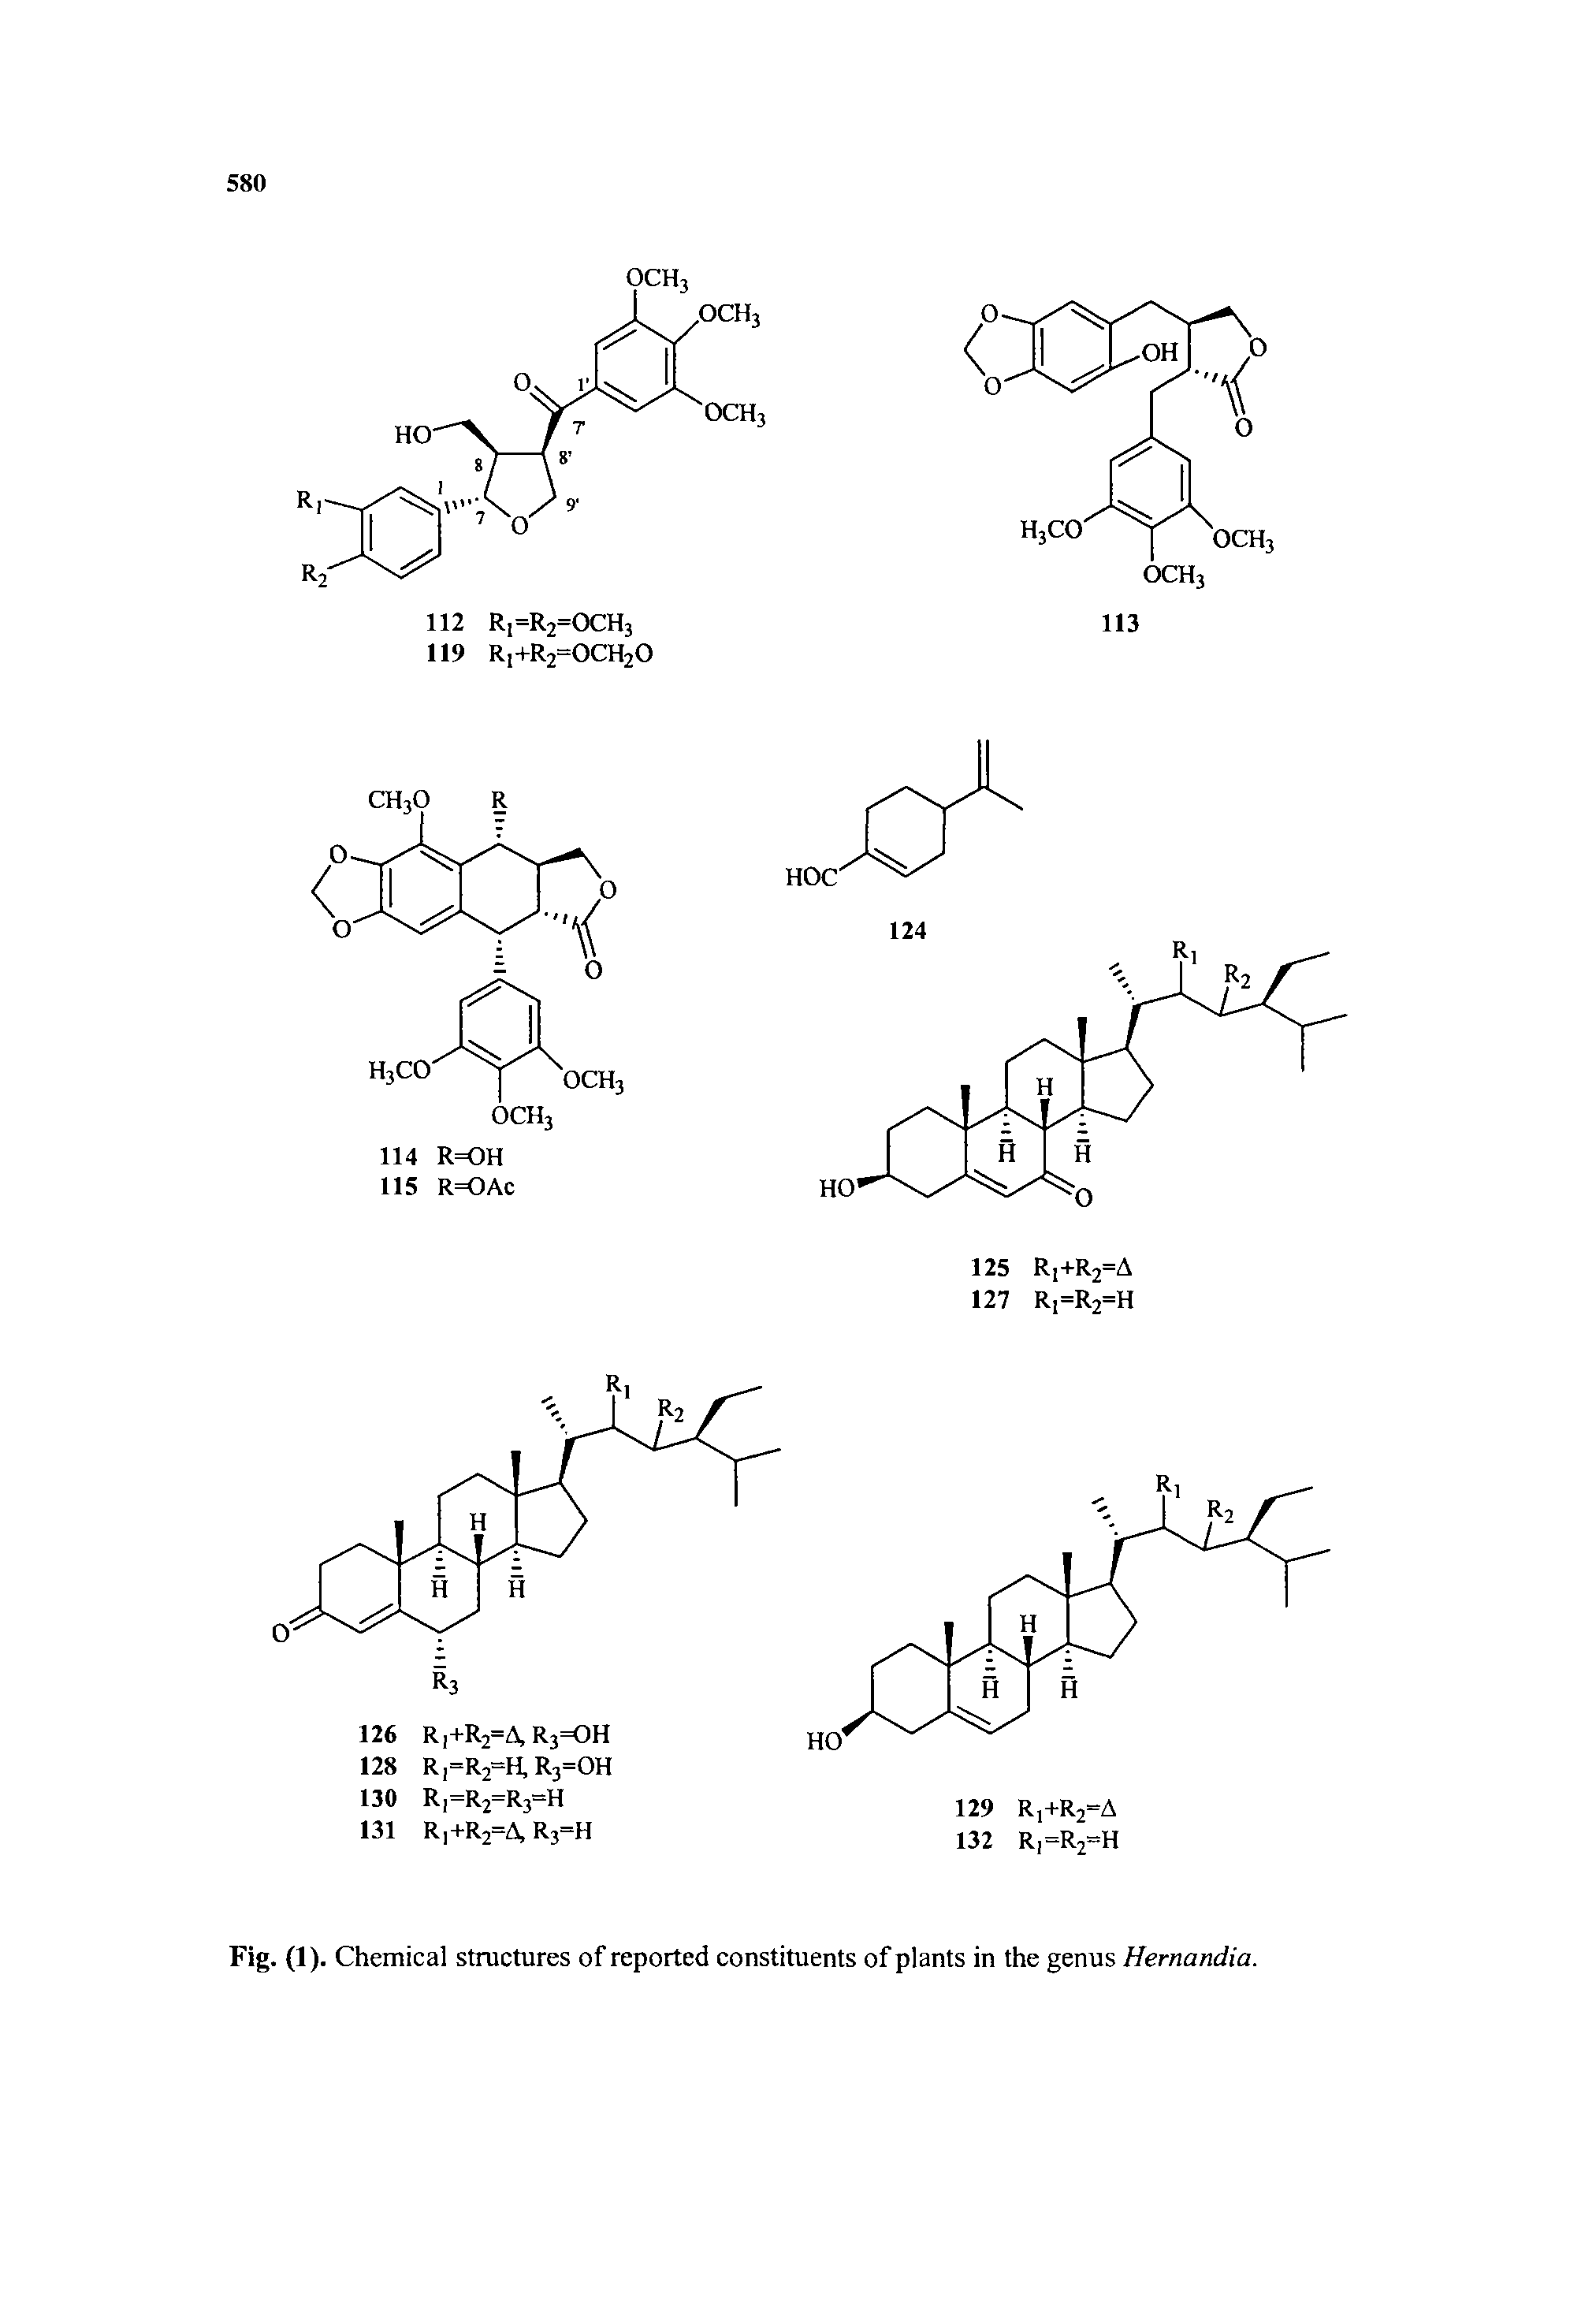 Fig. (1). Chemical structures of reported constituents of plants in the genus Hernandia.